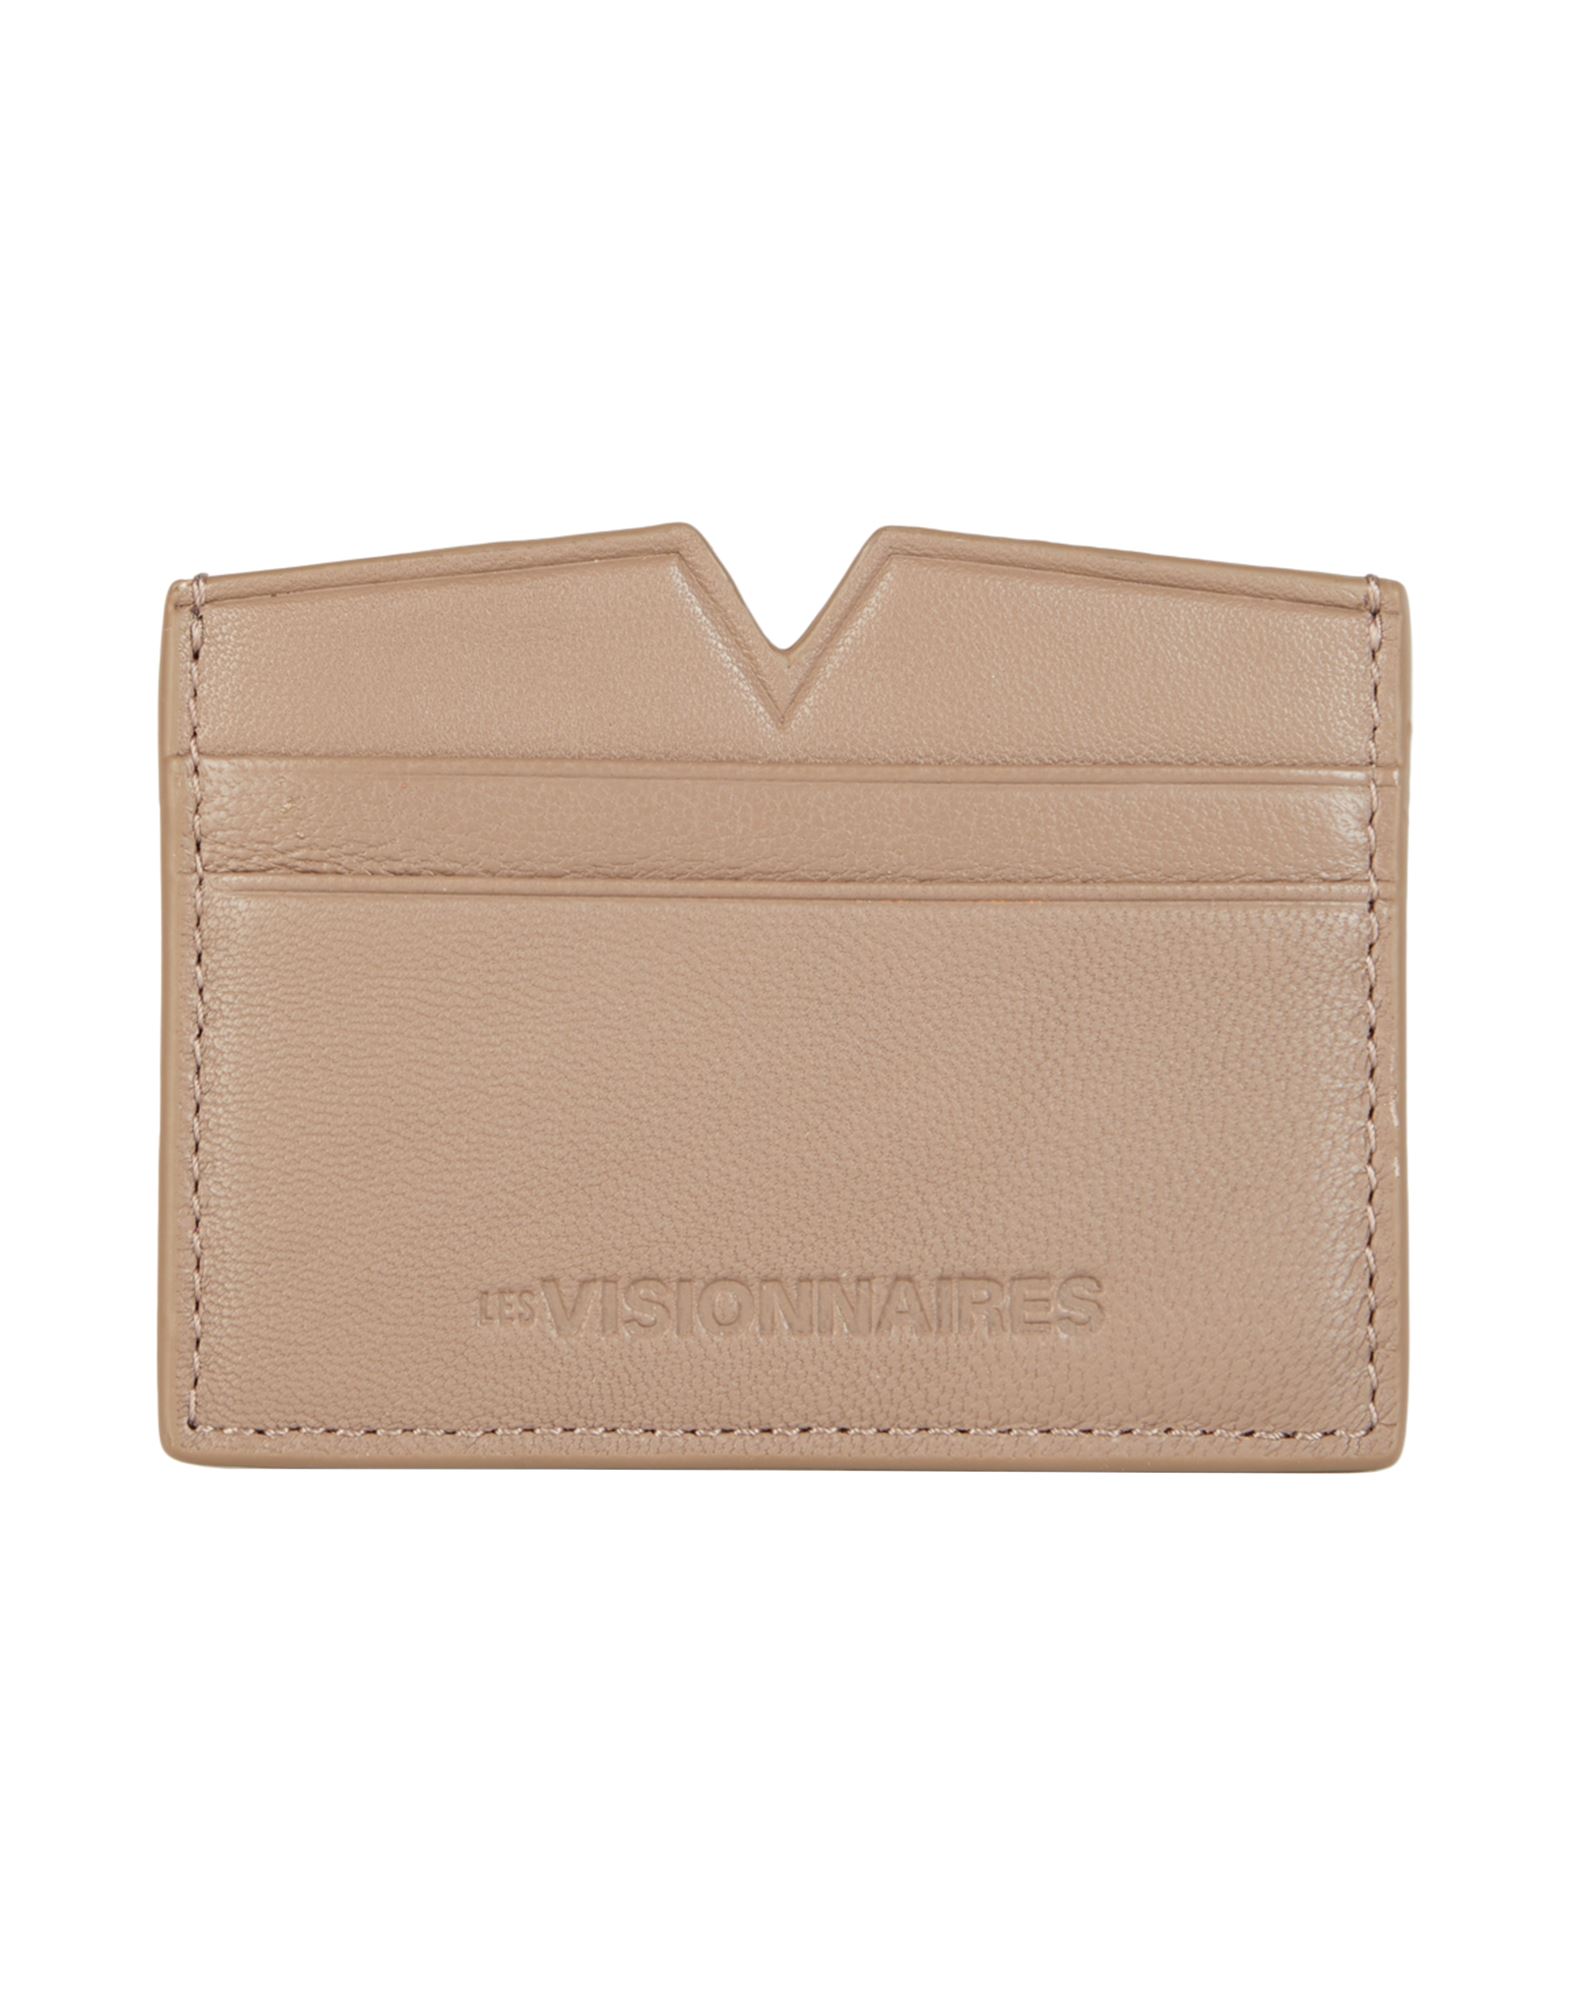 LES VISIONNAIRES LES VISIONNAIRES FENYA SILKY LEATHER WOMAN DOCUMENT HOLDER DOVE GREY SIZE - LAMBSKIN